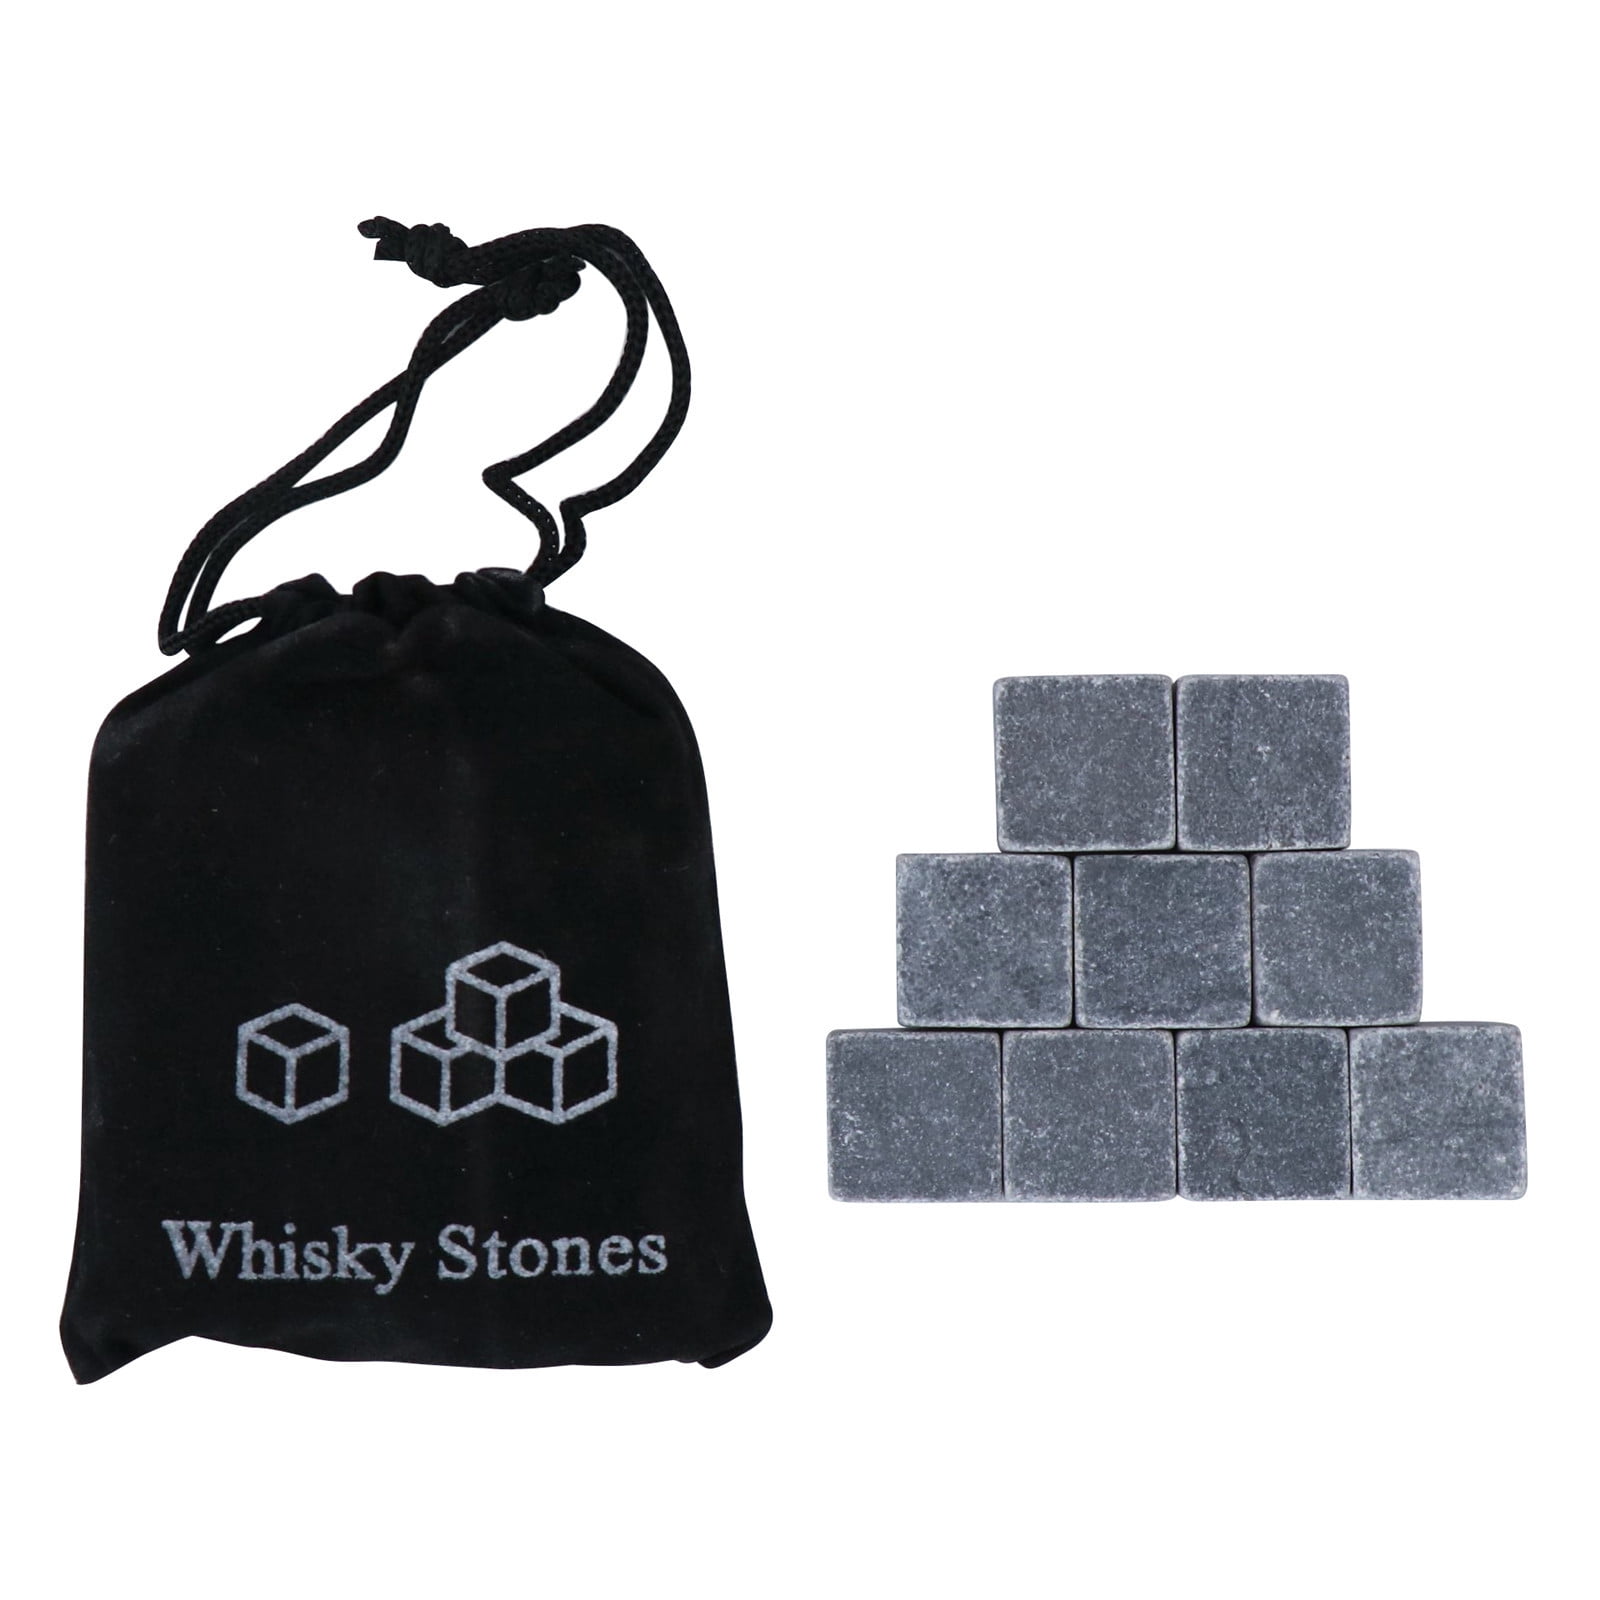 Soapstone Whisky Stones Christmas Clearance Reduced to clear 9 pieces and pouch 